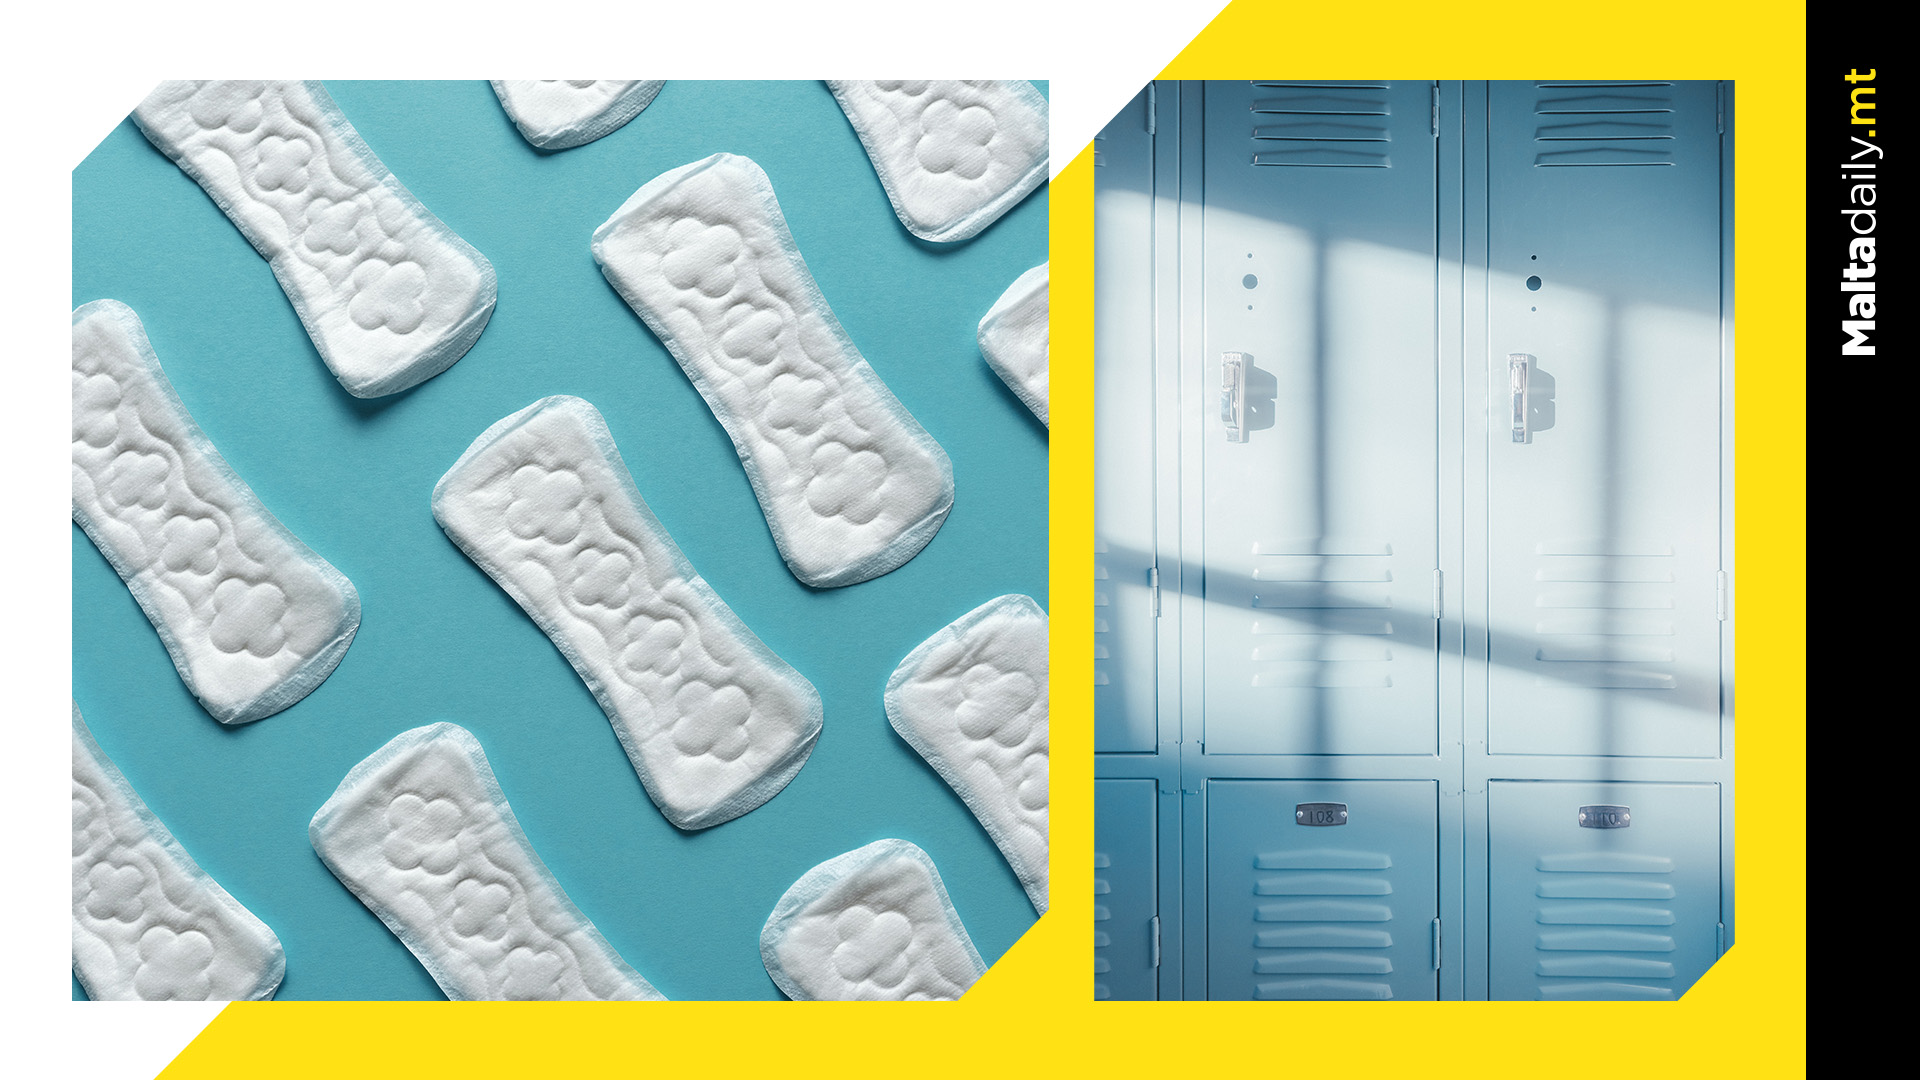 'Period locker' with free pads, tampons & liners introduced at University of Malta